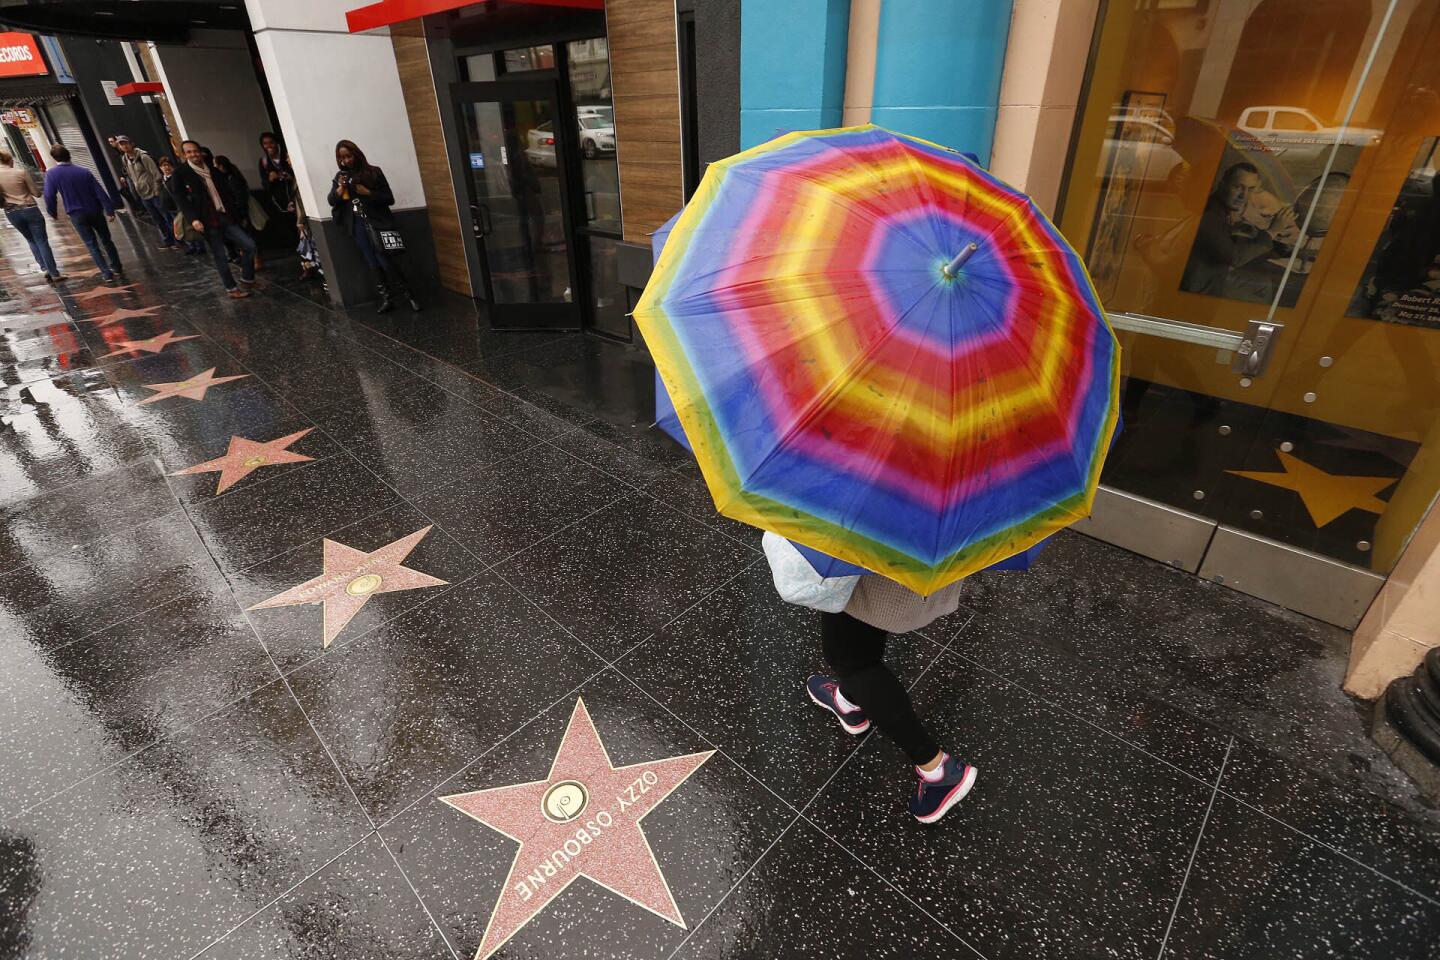 Rainbows on umbrellas are the fashion Thursday morning on the Hollywood walk of fame as a rainstorm moved out of Southern California to make way for warmer conditions.